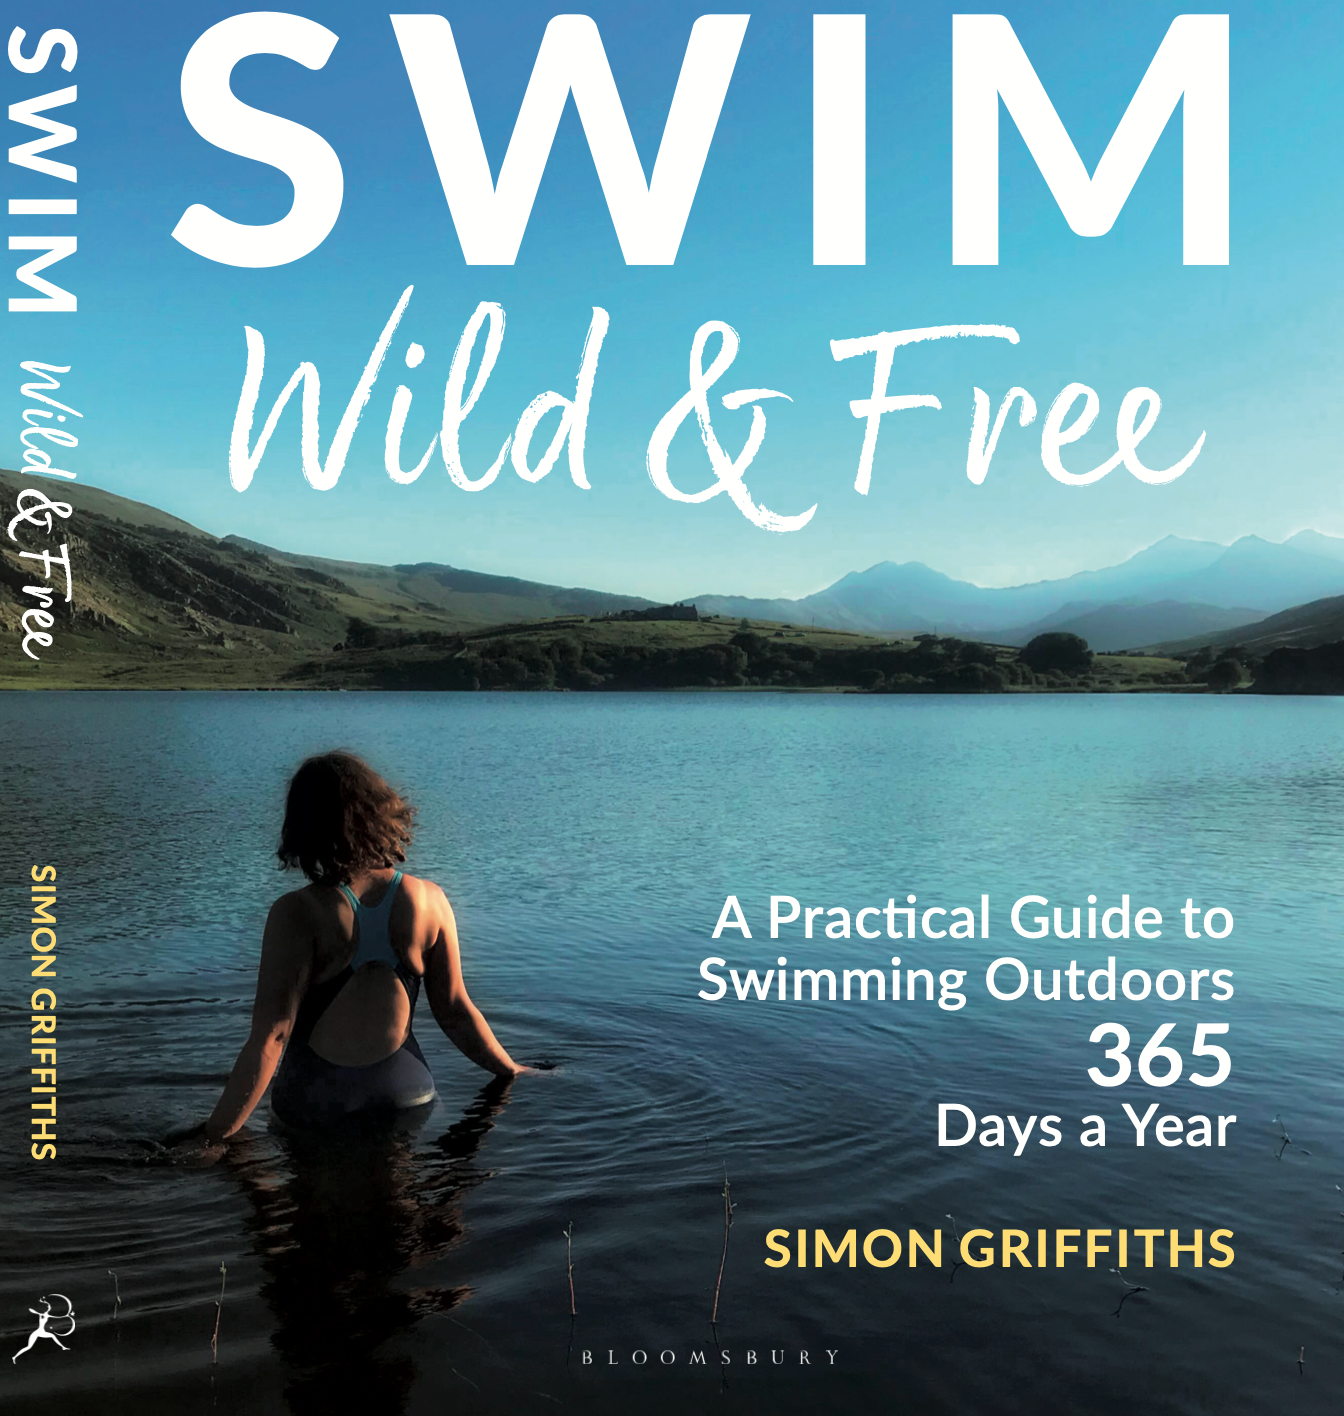 Swim Wild & Free - A Practical Guide to Swimming Outdoors 365 Days